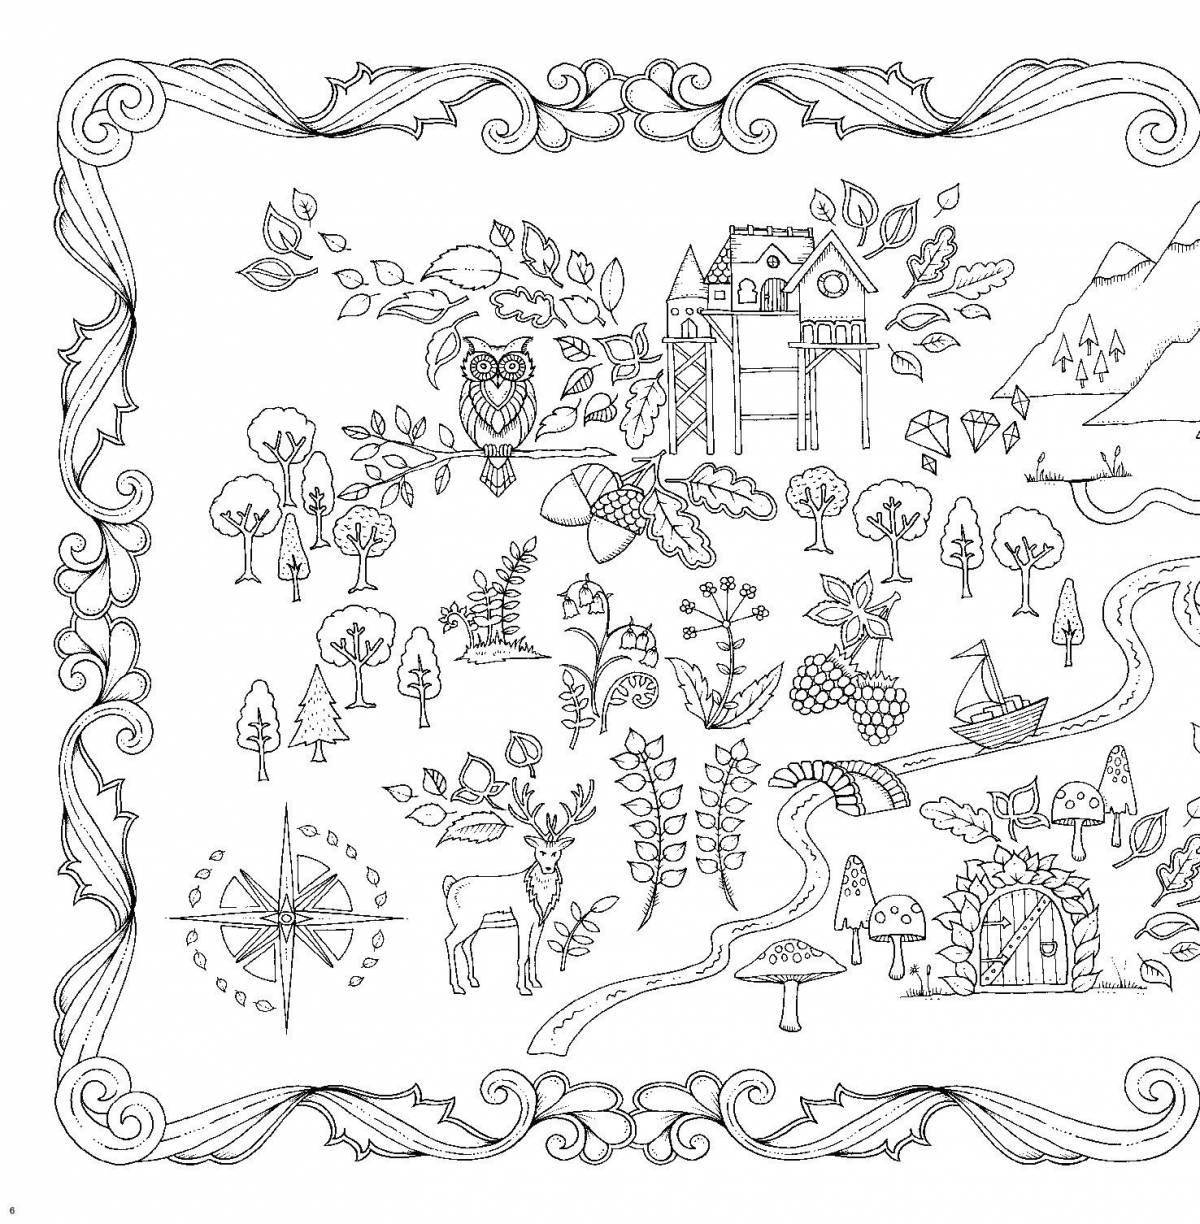 Awesome forest coloring page